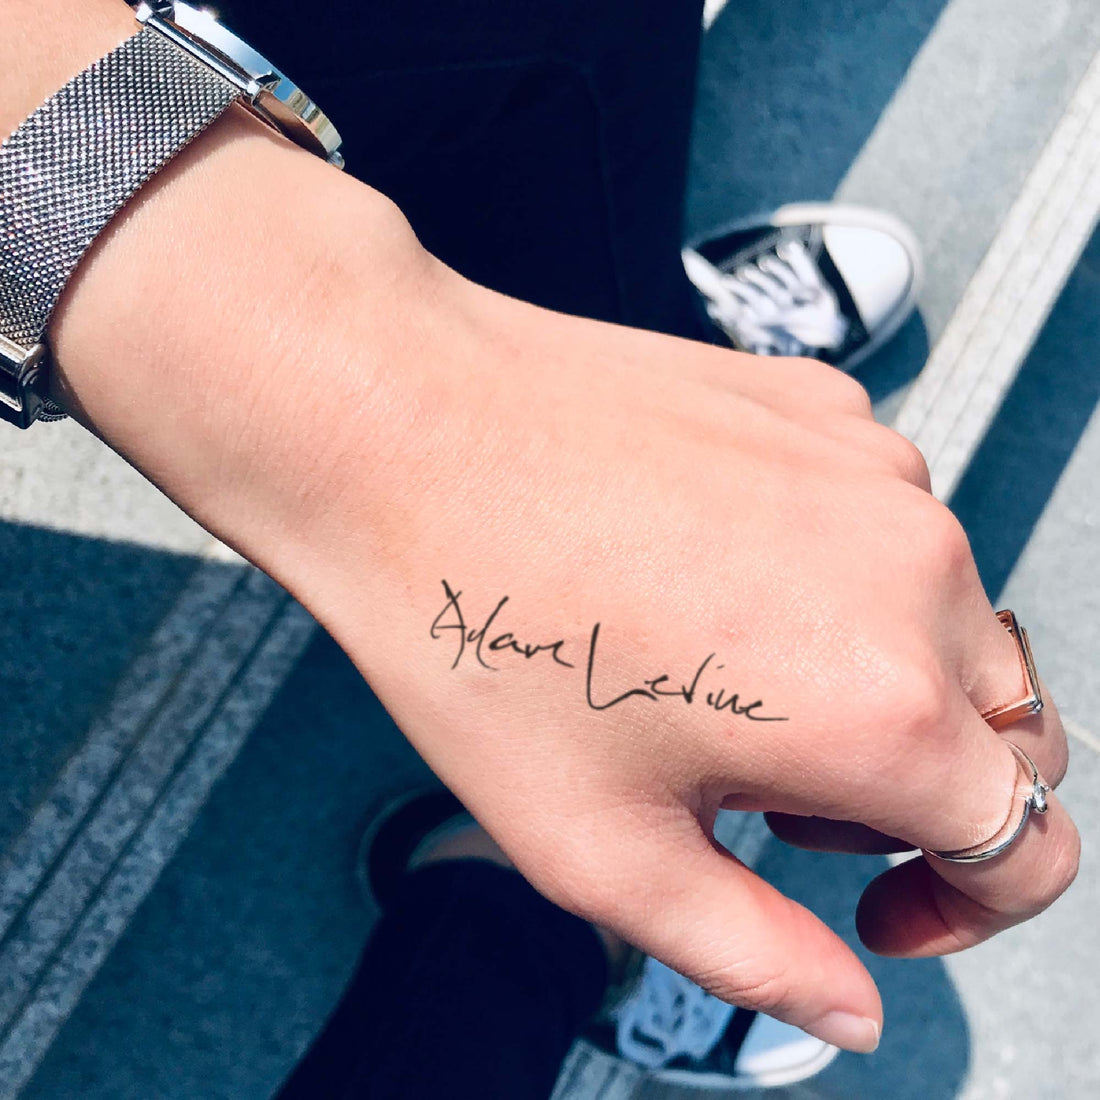 Adam Levine custom temporary tattoo sticker design idea inspiration meanings removal arm wrist hand words font name signature calligraphy lyrics tour concert outfits merch accessory gift souvenir costumes wear dress up code